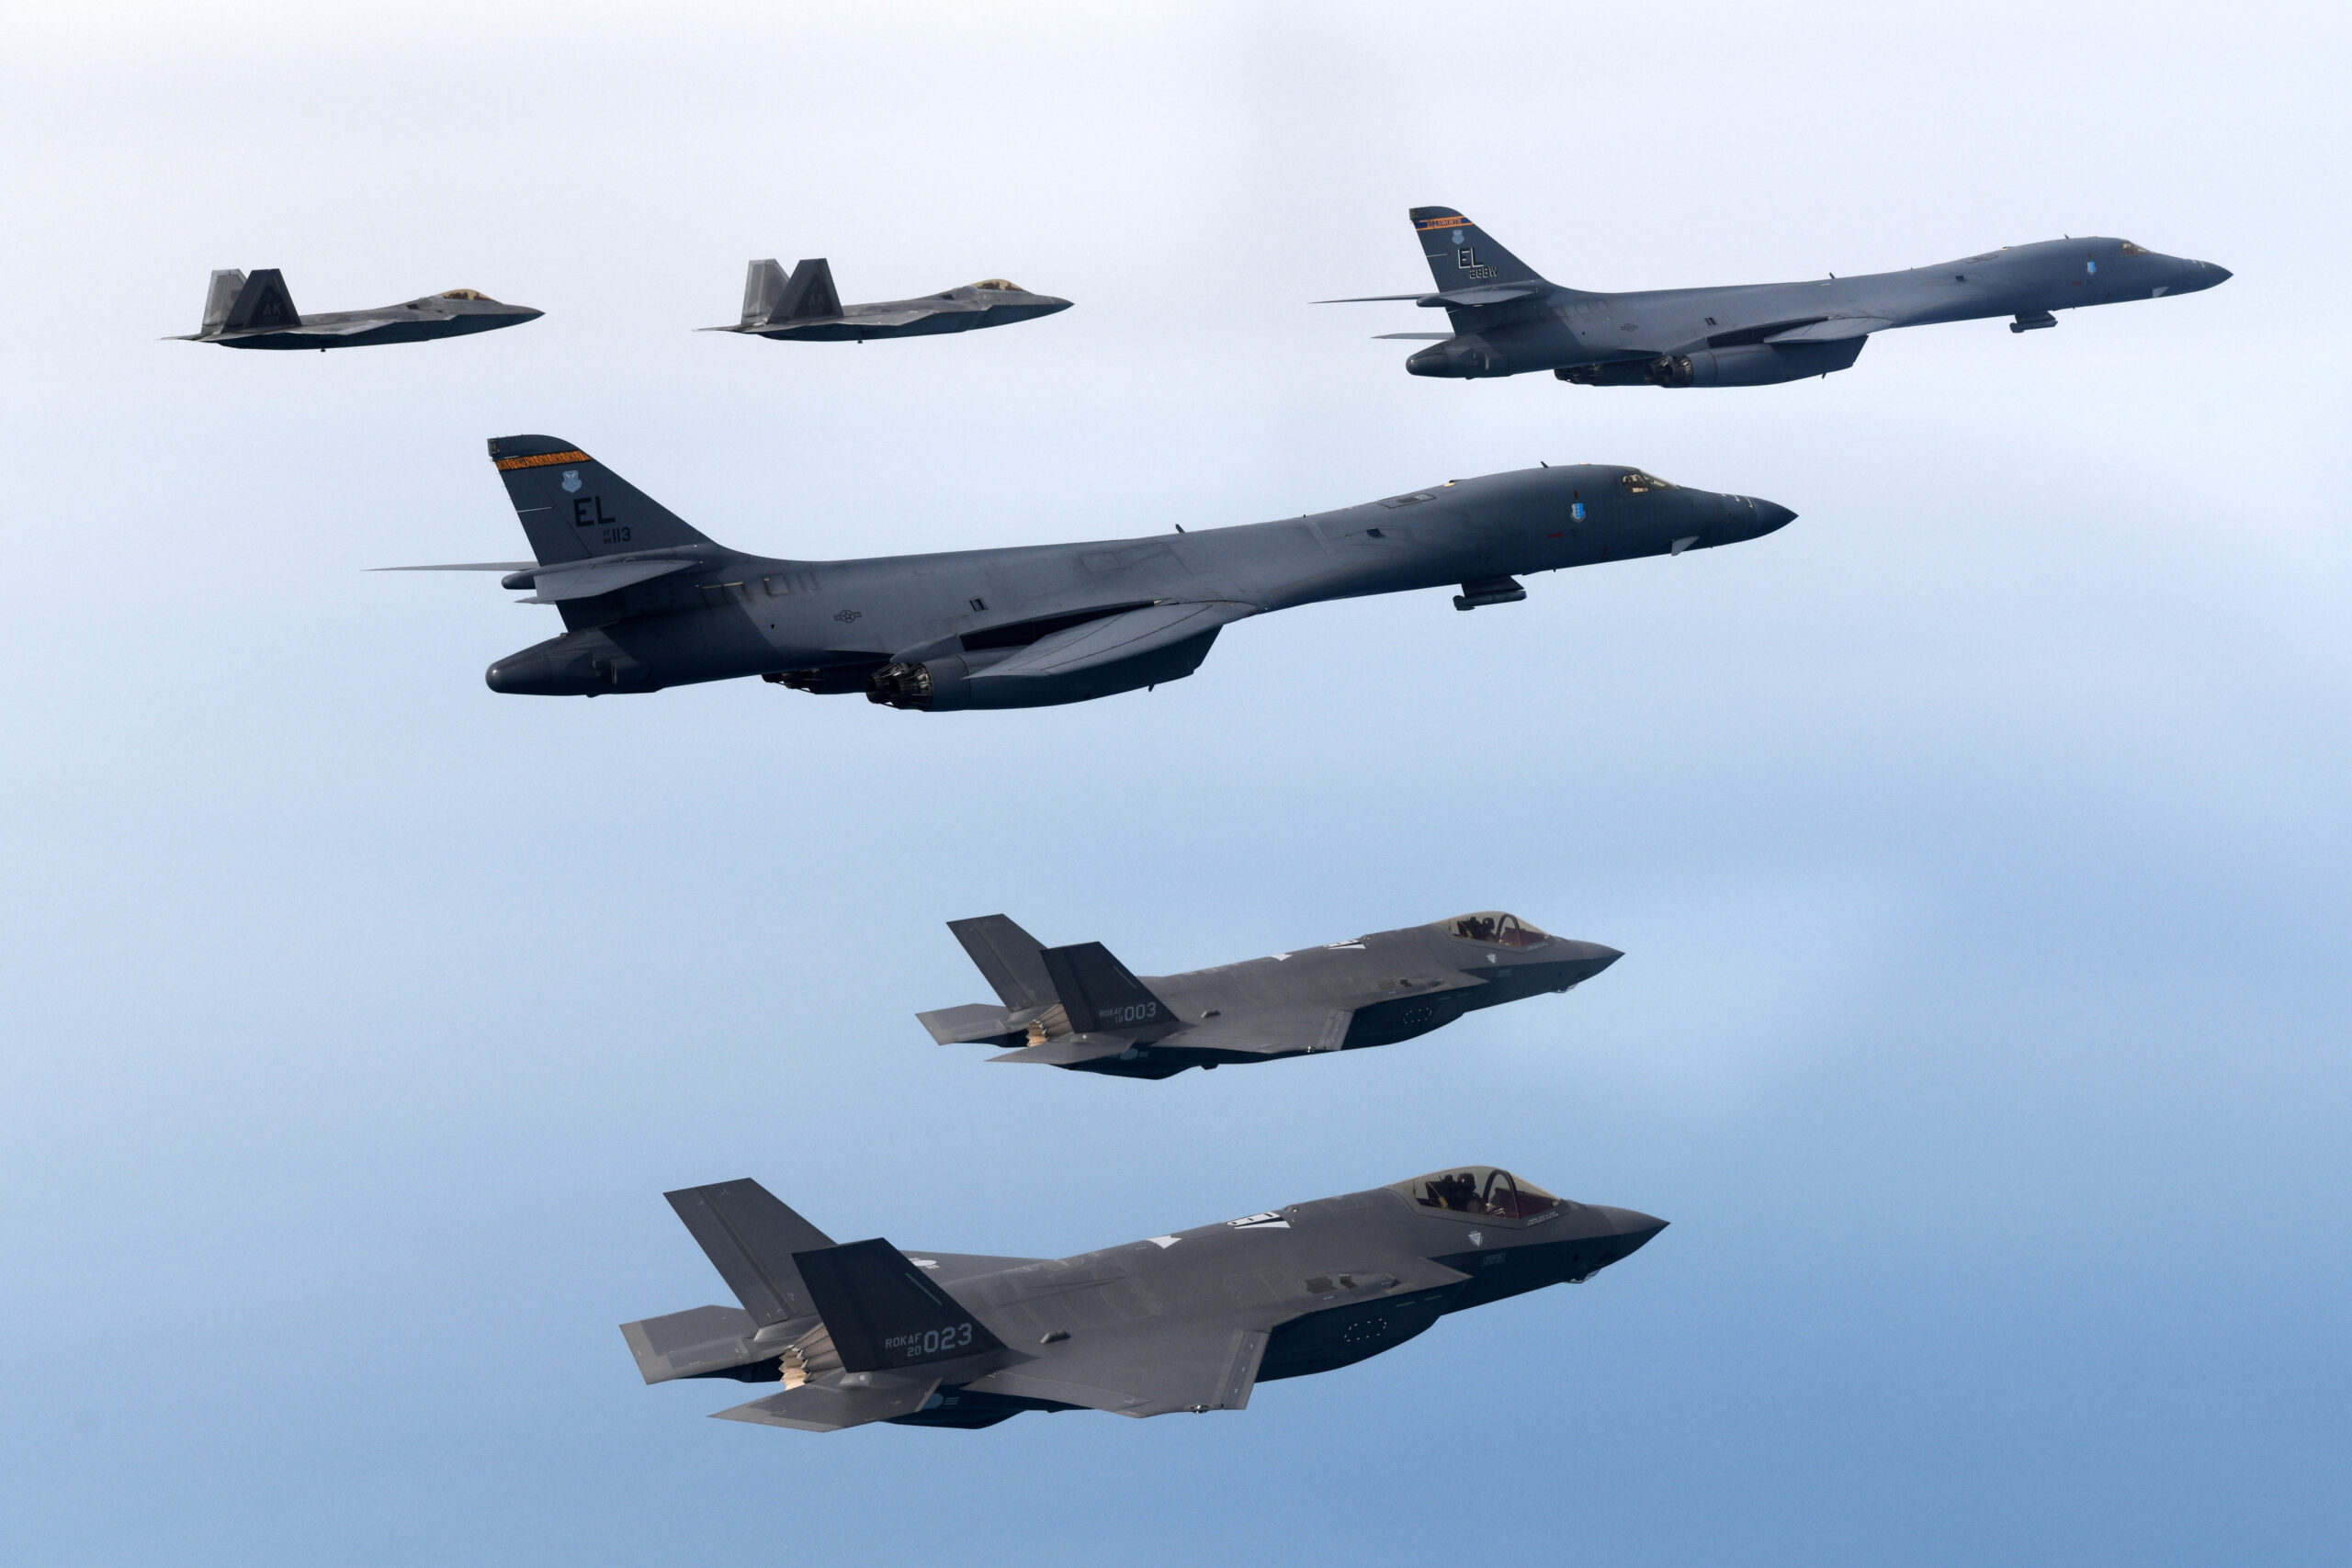 A U.S. Air Force B-1B bomber and F-22 stealth fighters together with Republic of Korea Air Force F-35As fly over South Korea during a joint air drill on February 1, 2023. <em>Photo by South Korean Defense Ministry via Getty Images</em>